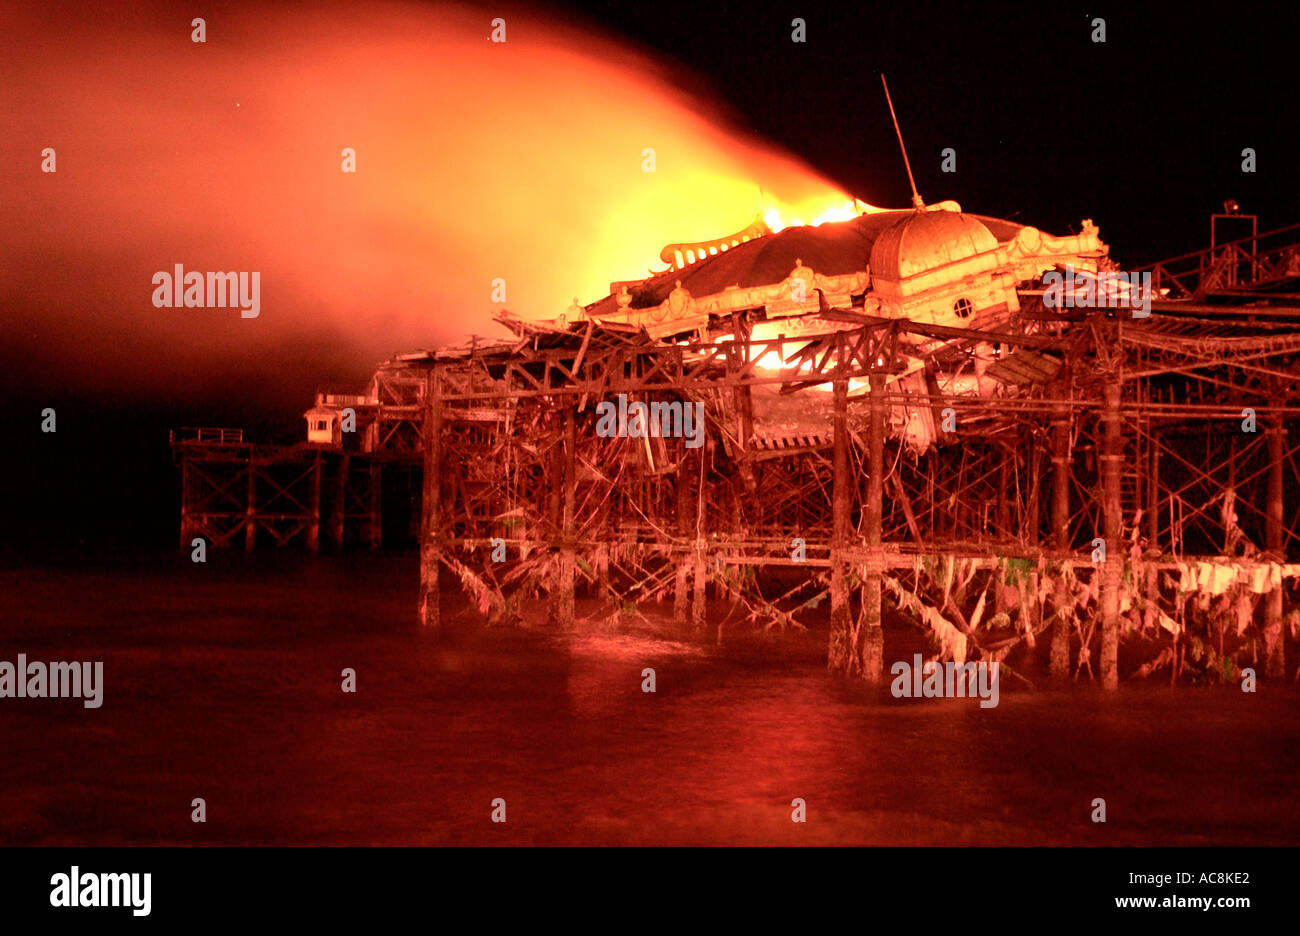 The concert hall theatre of the West Pier, Brighton on fire after arson attack Stock Photo